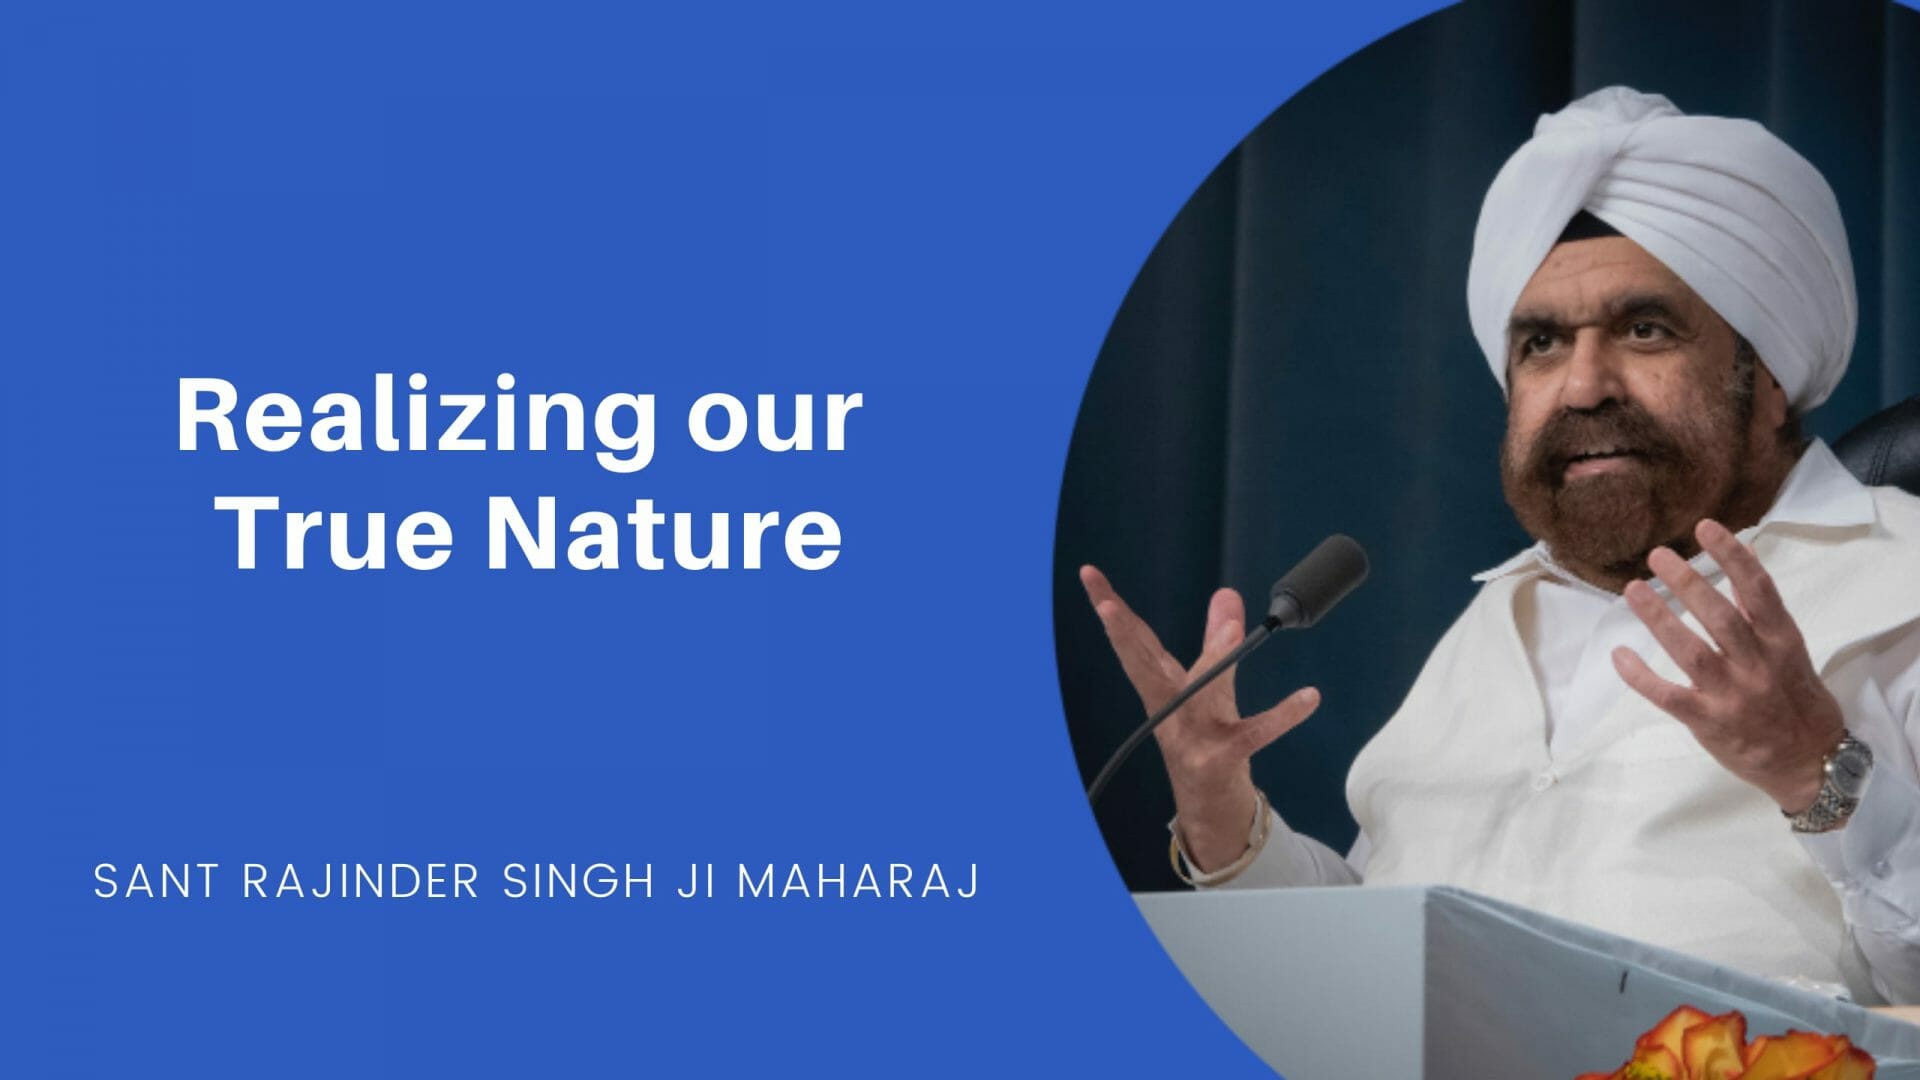 Cover slide for Realizing Our True Nature - An excerpt of a talk by Sant Rajinder Singh Ji Maharj